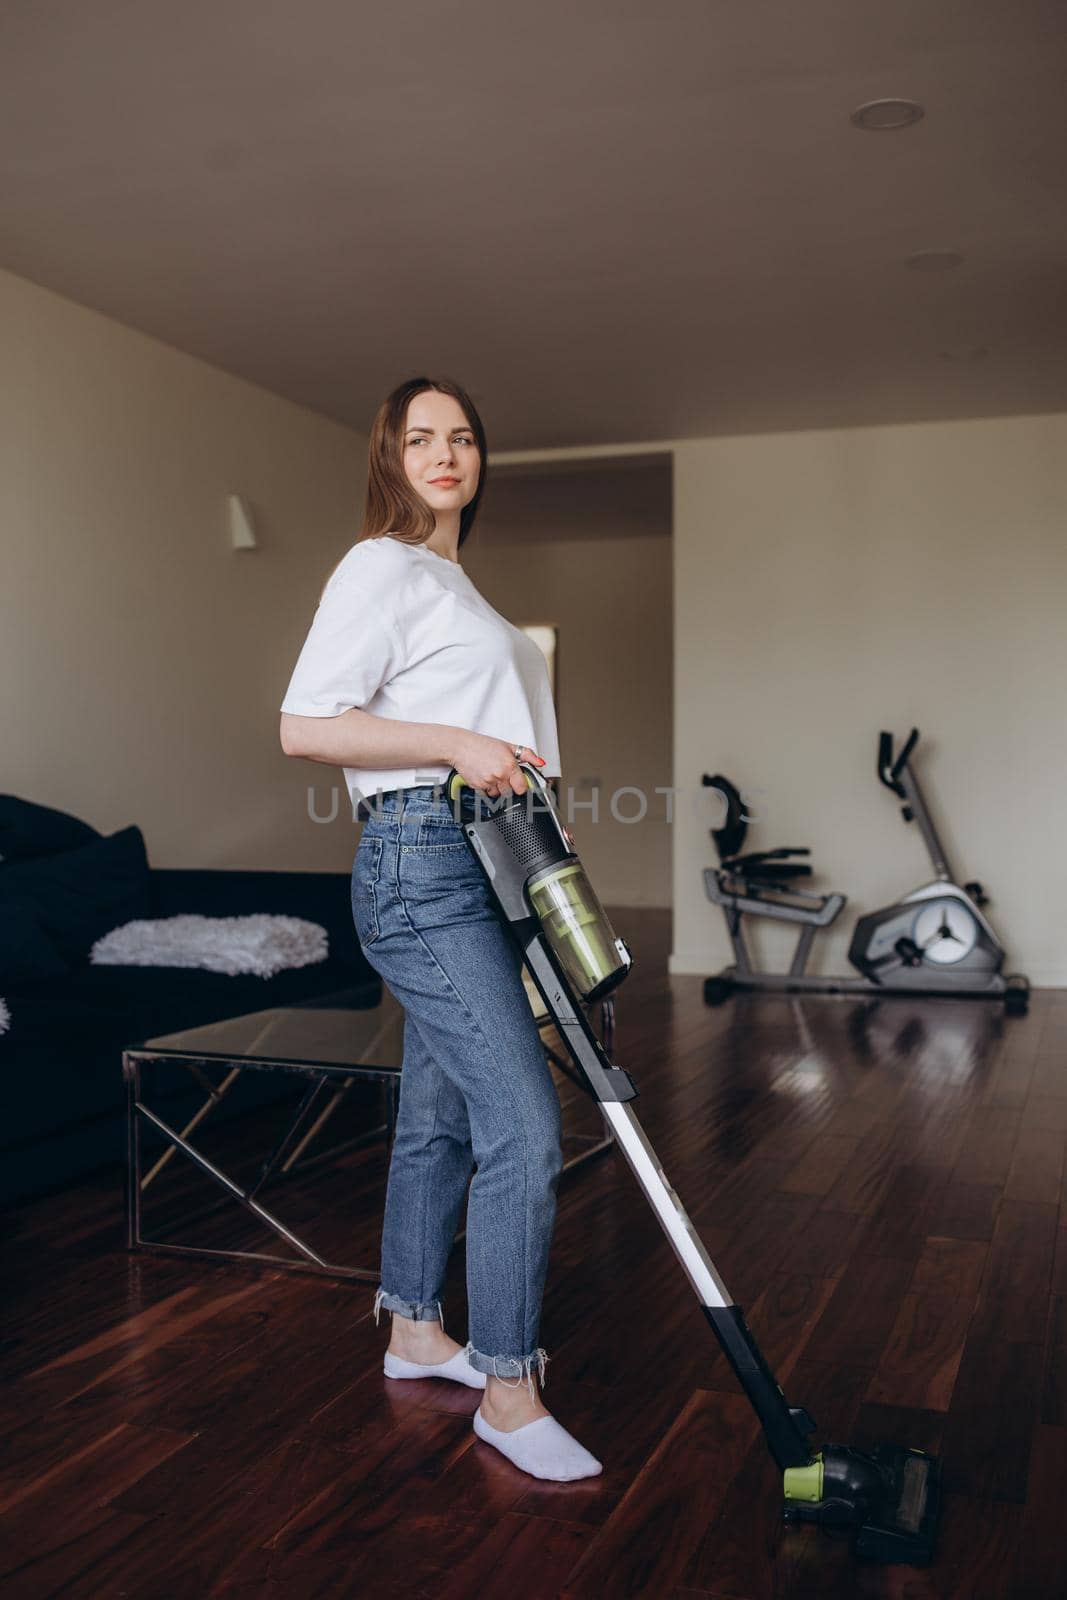 Young Maid Cleaning Carpet With Vacuum Cleaner At Home.